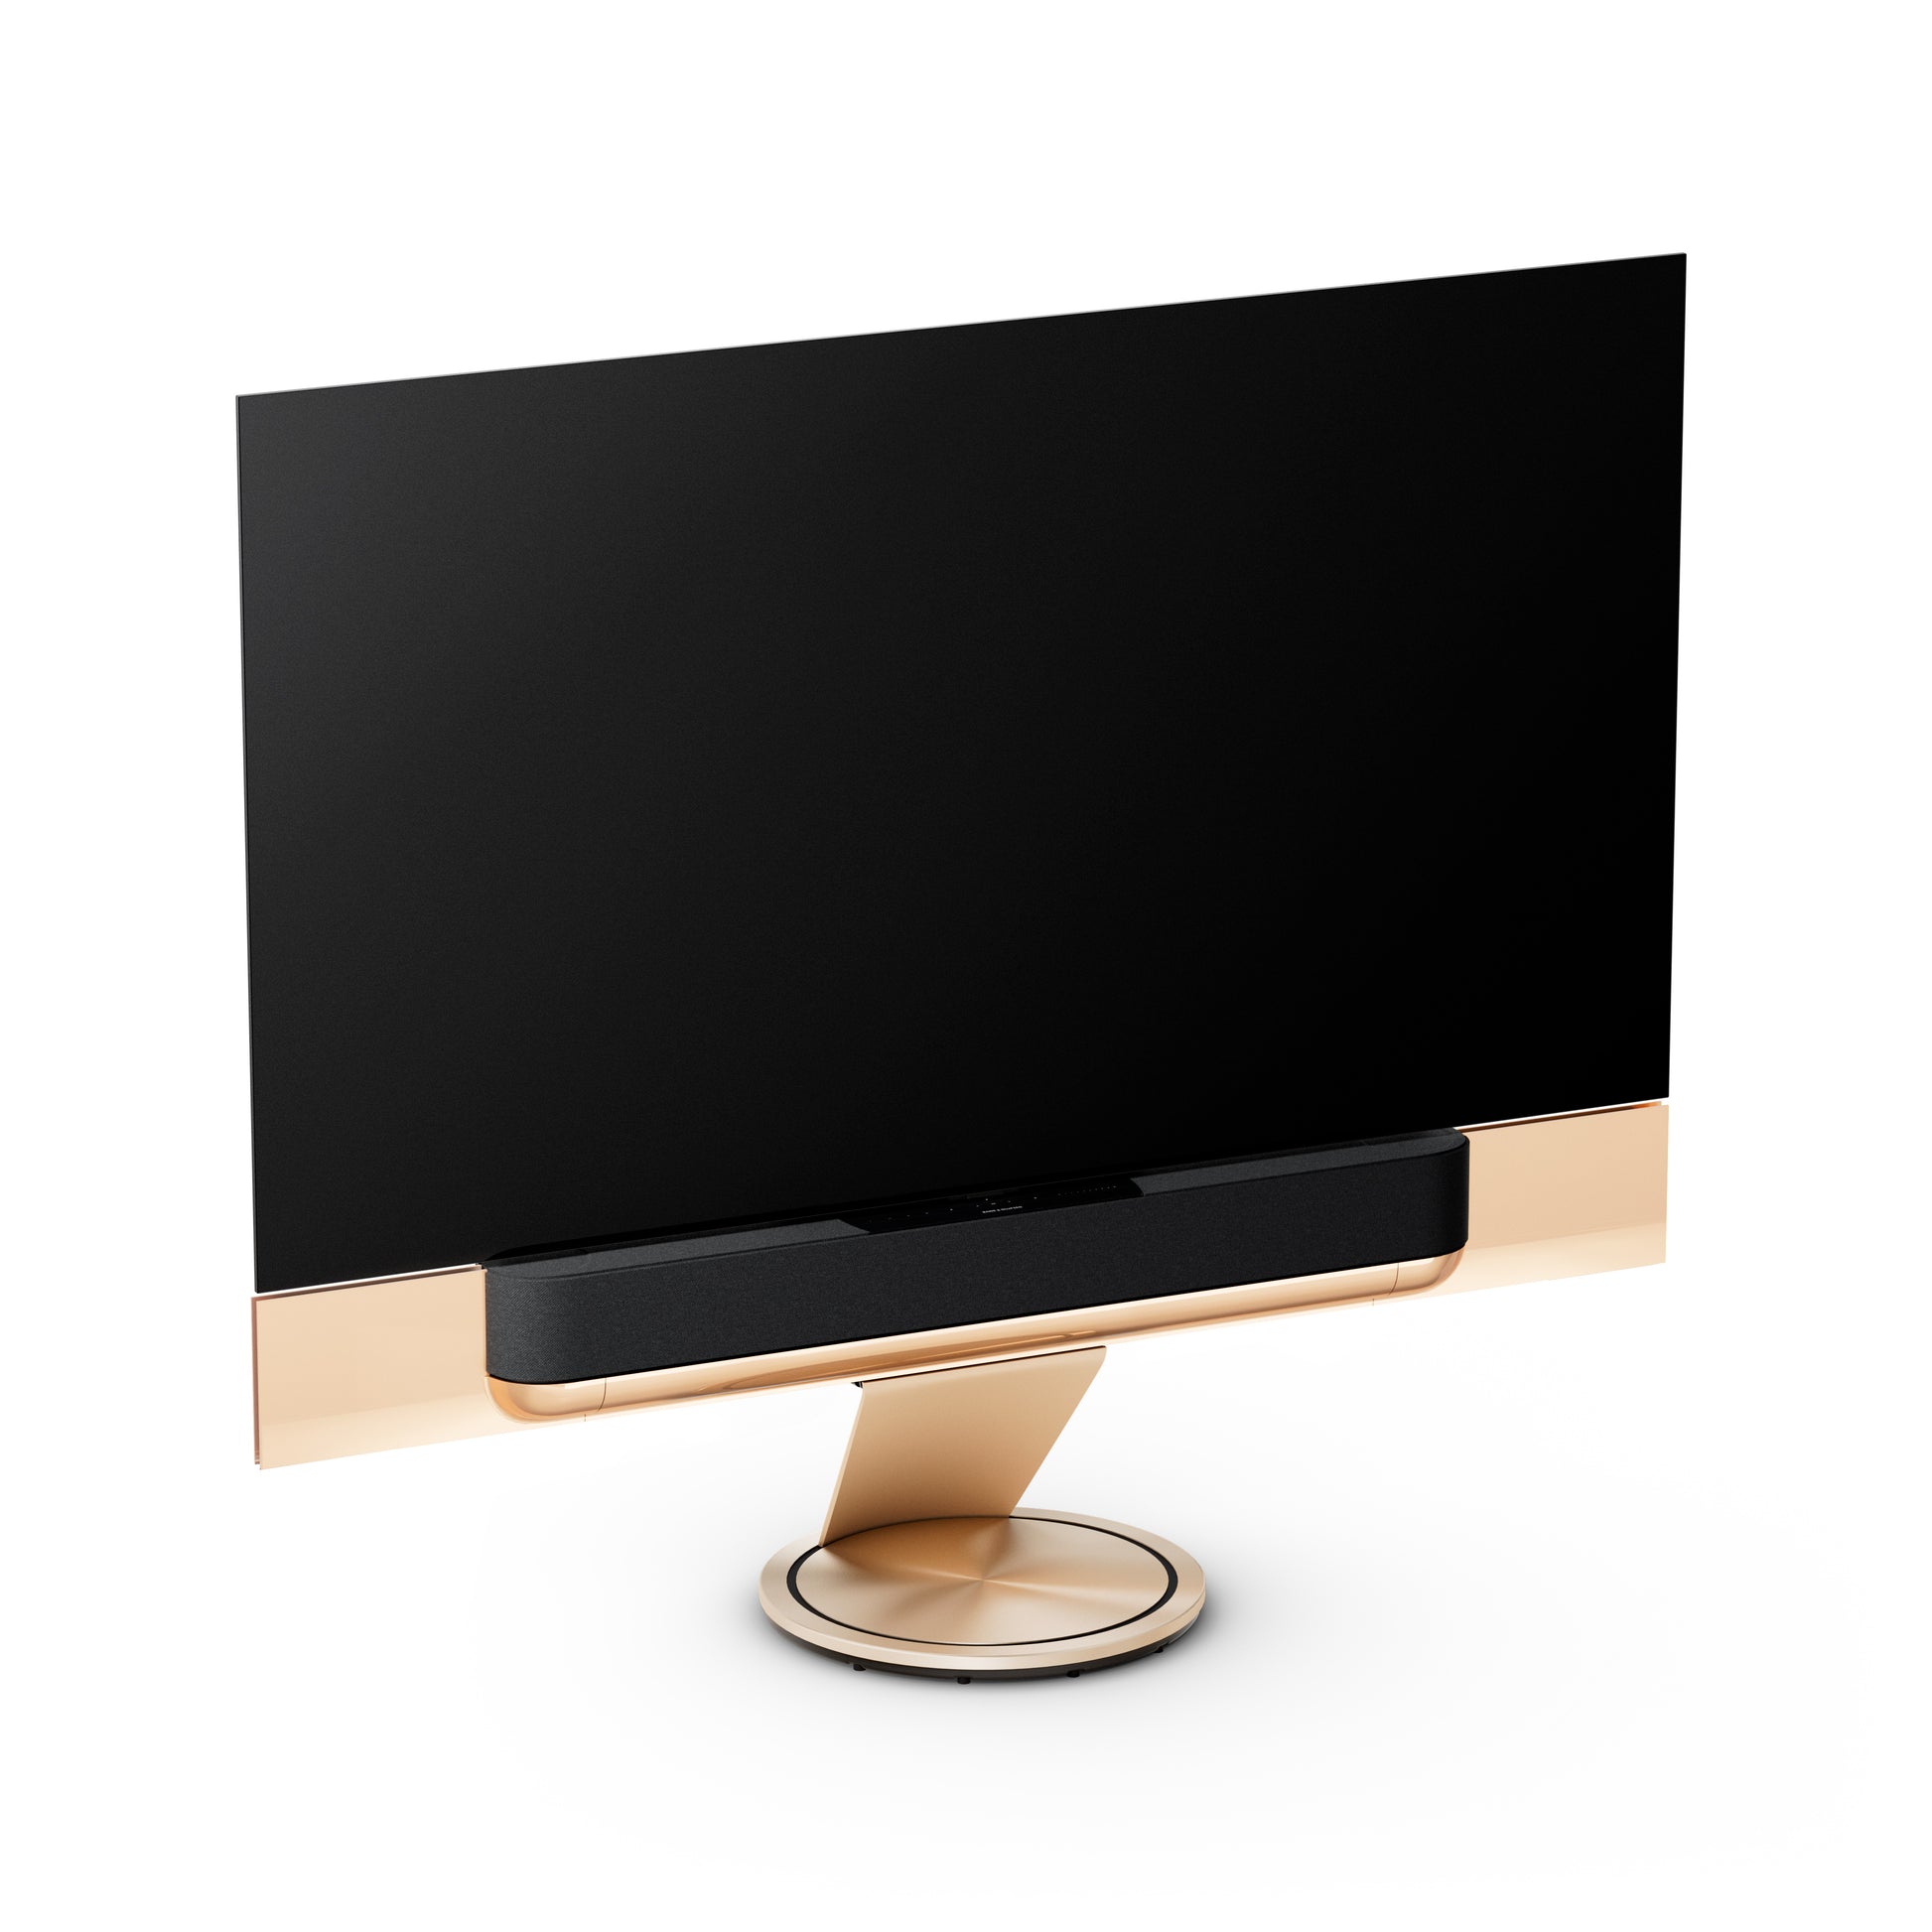 BeoSound Theatre in gold tone as TV in 77 inches  with cover in grey melange on floor stand